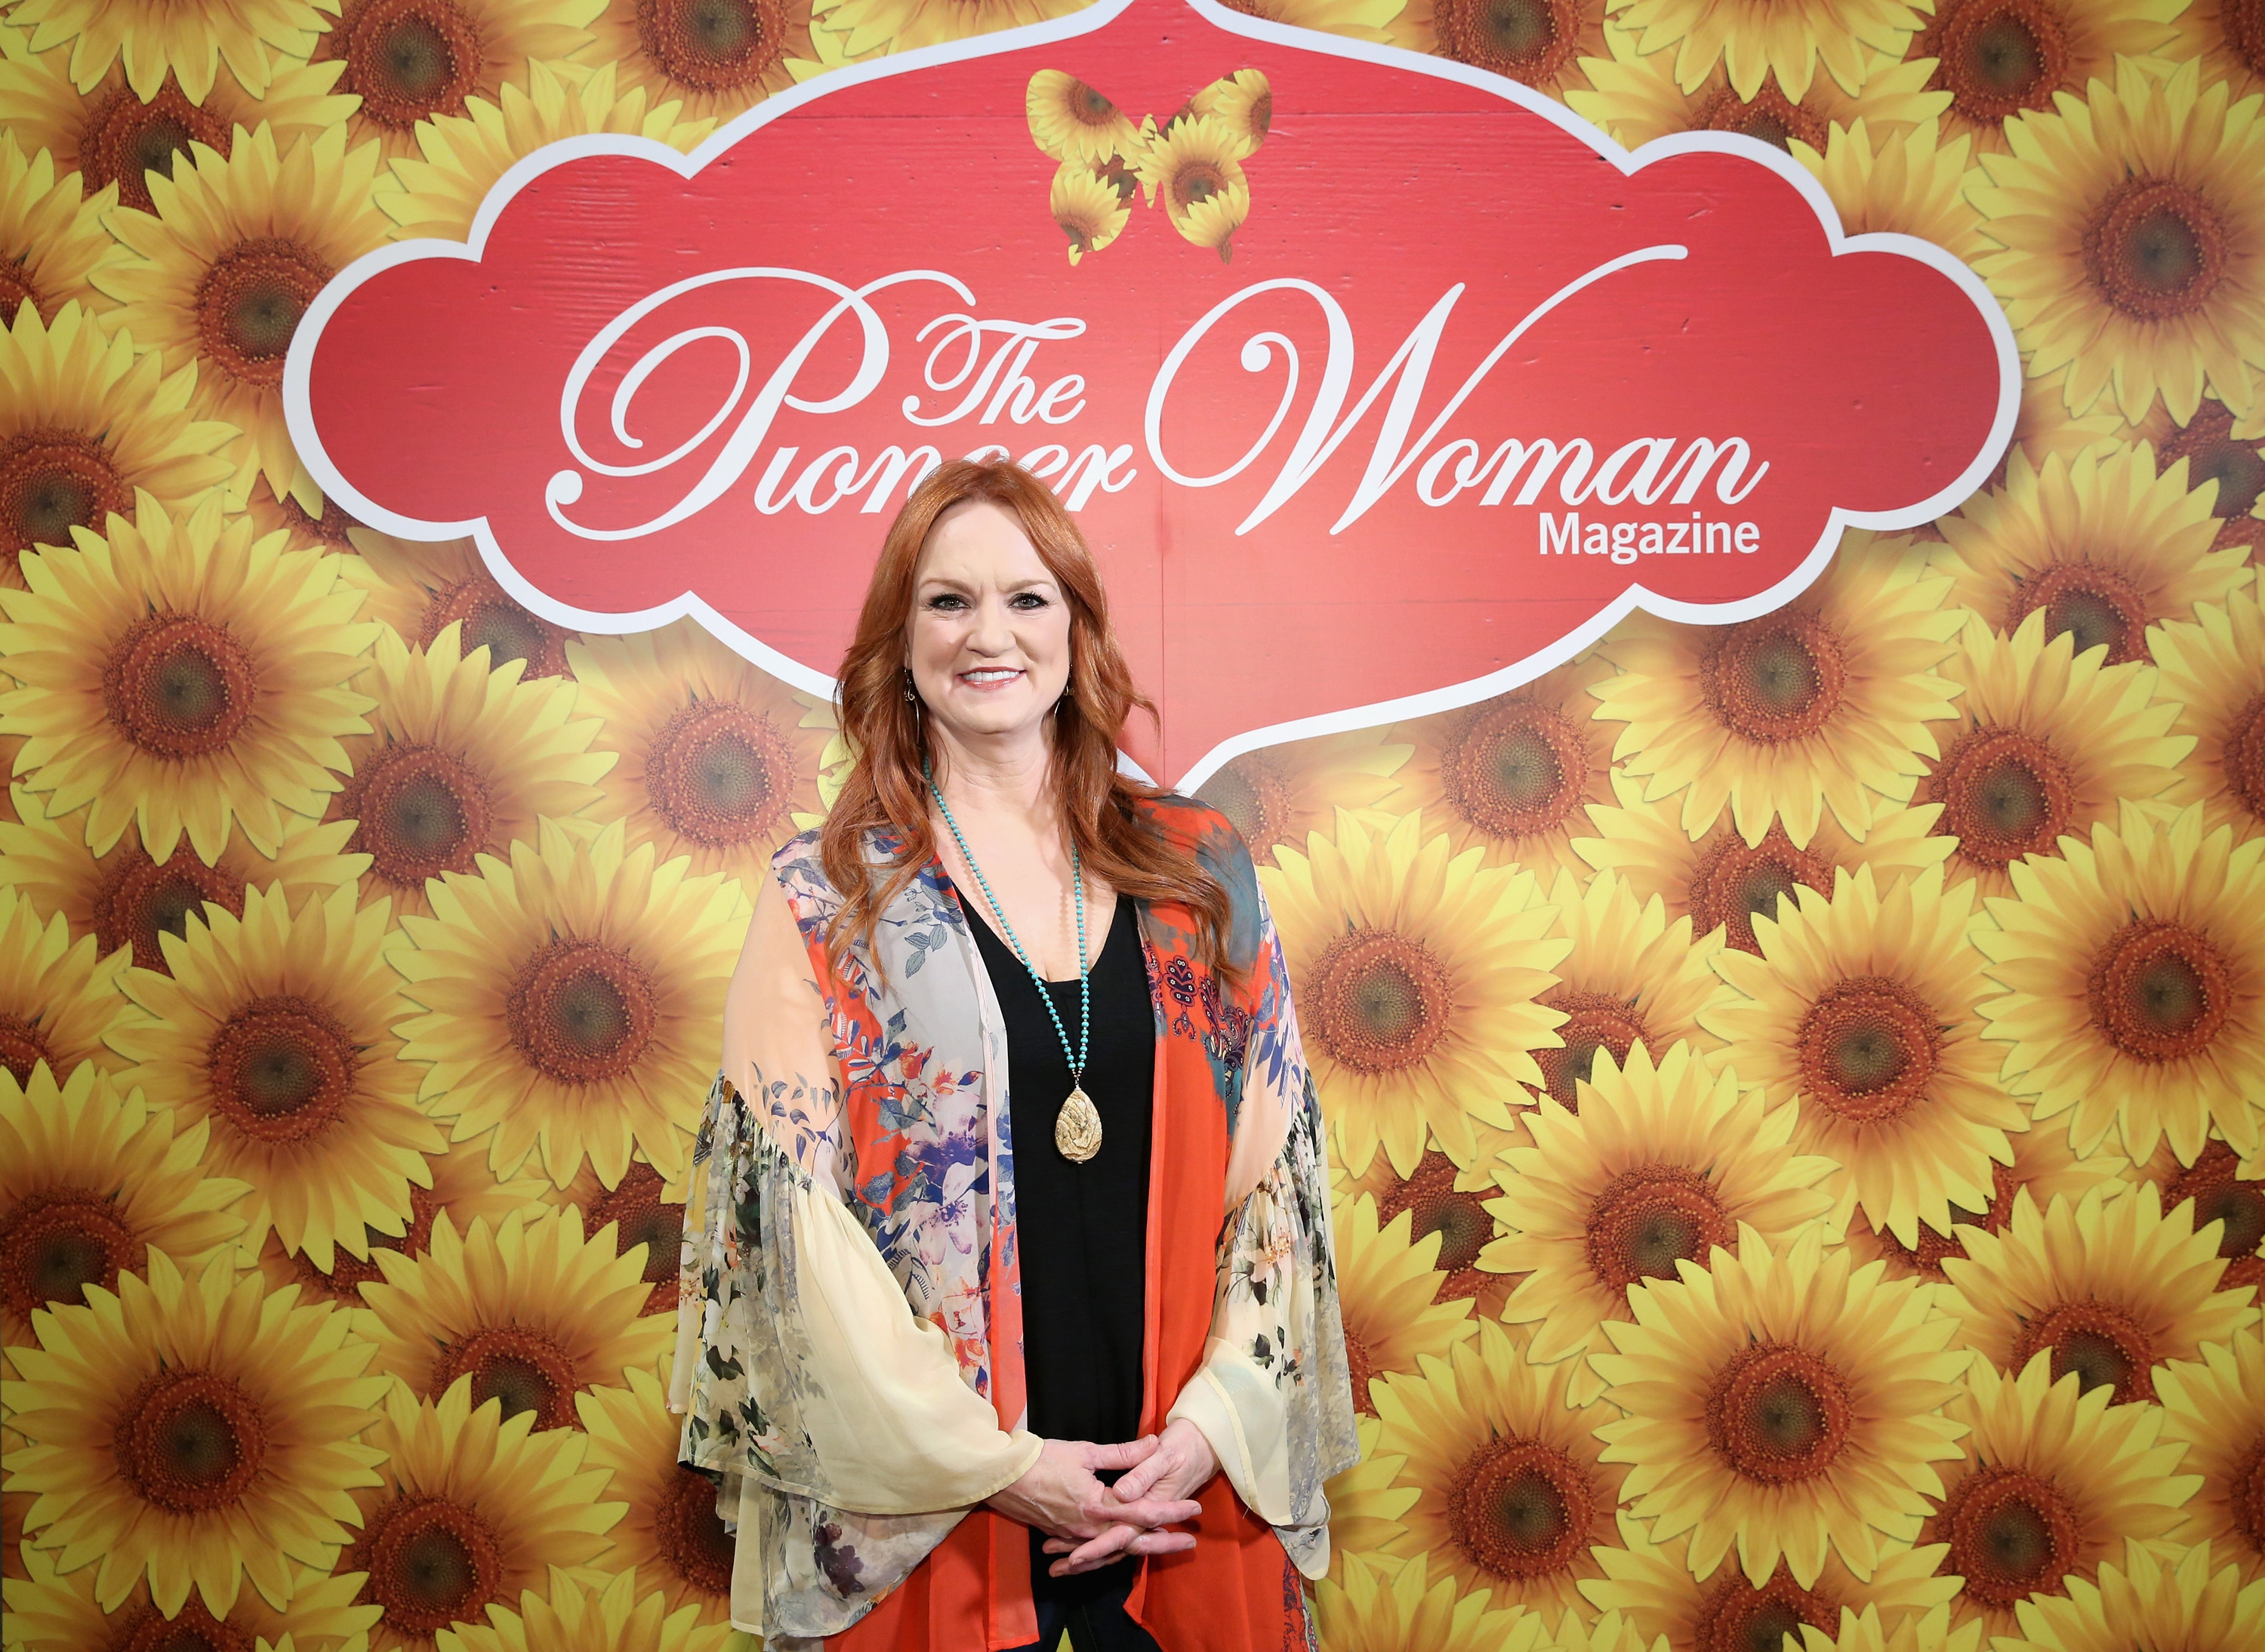 Ree Drummond poses in front of a flower wall.